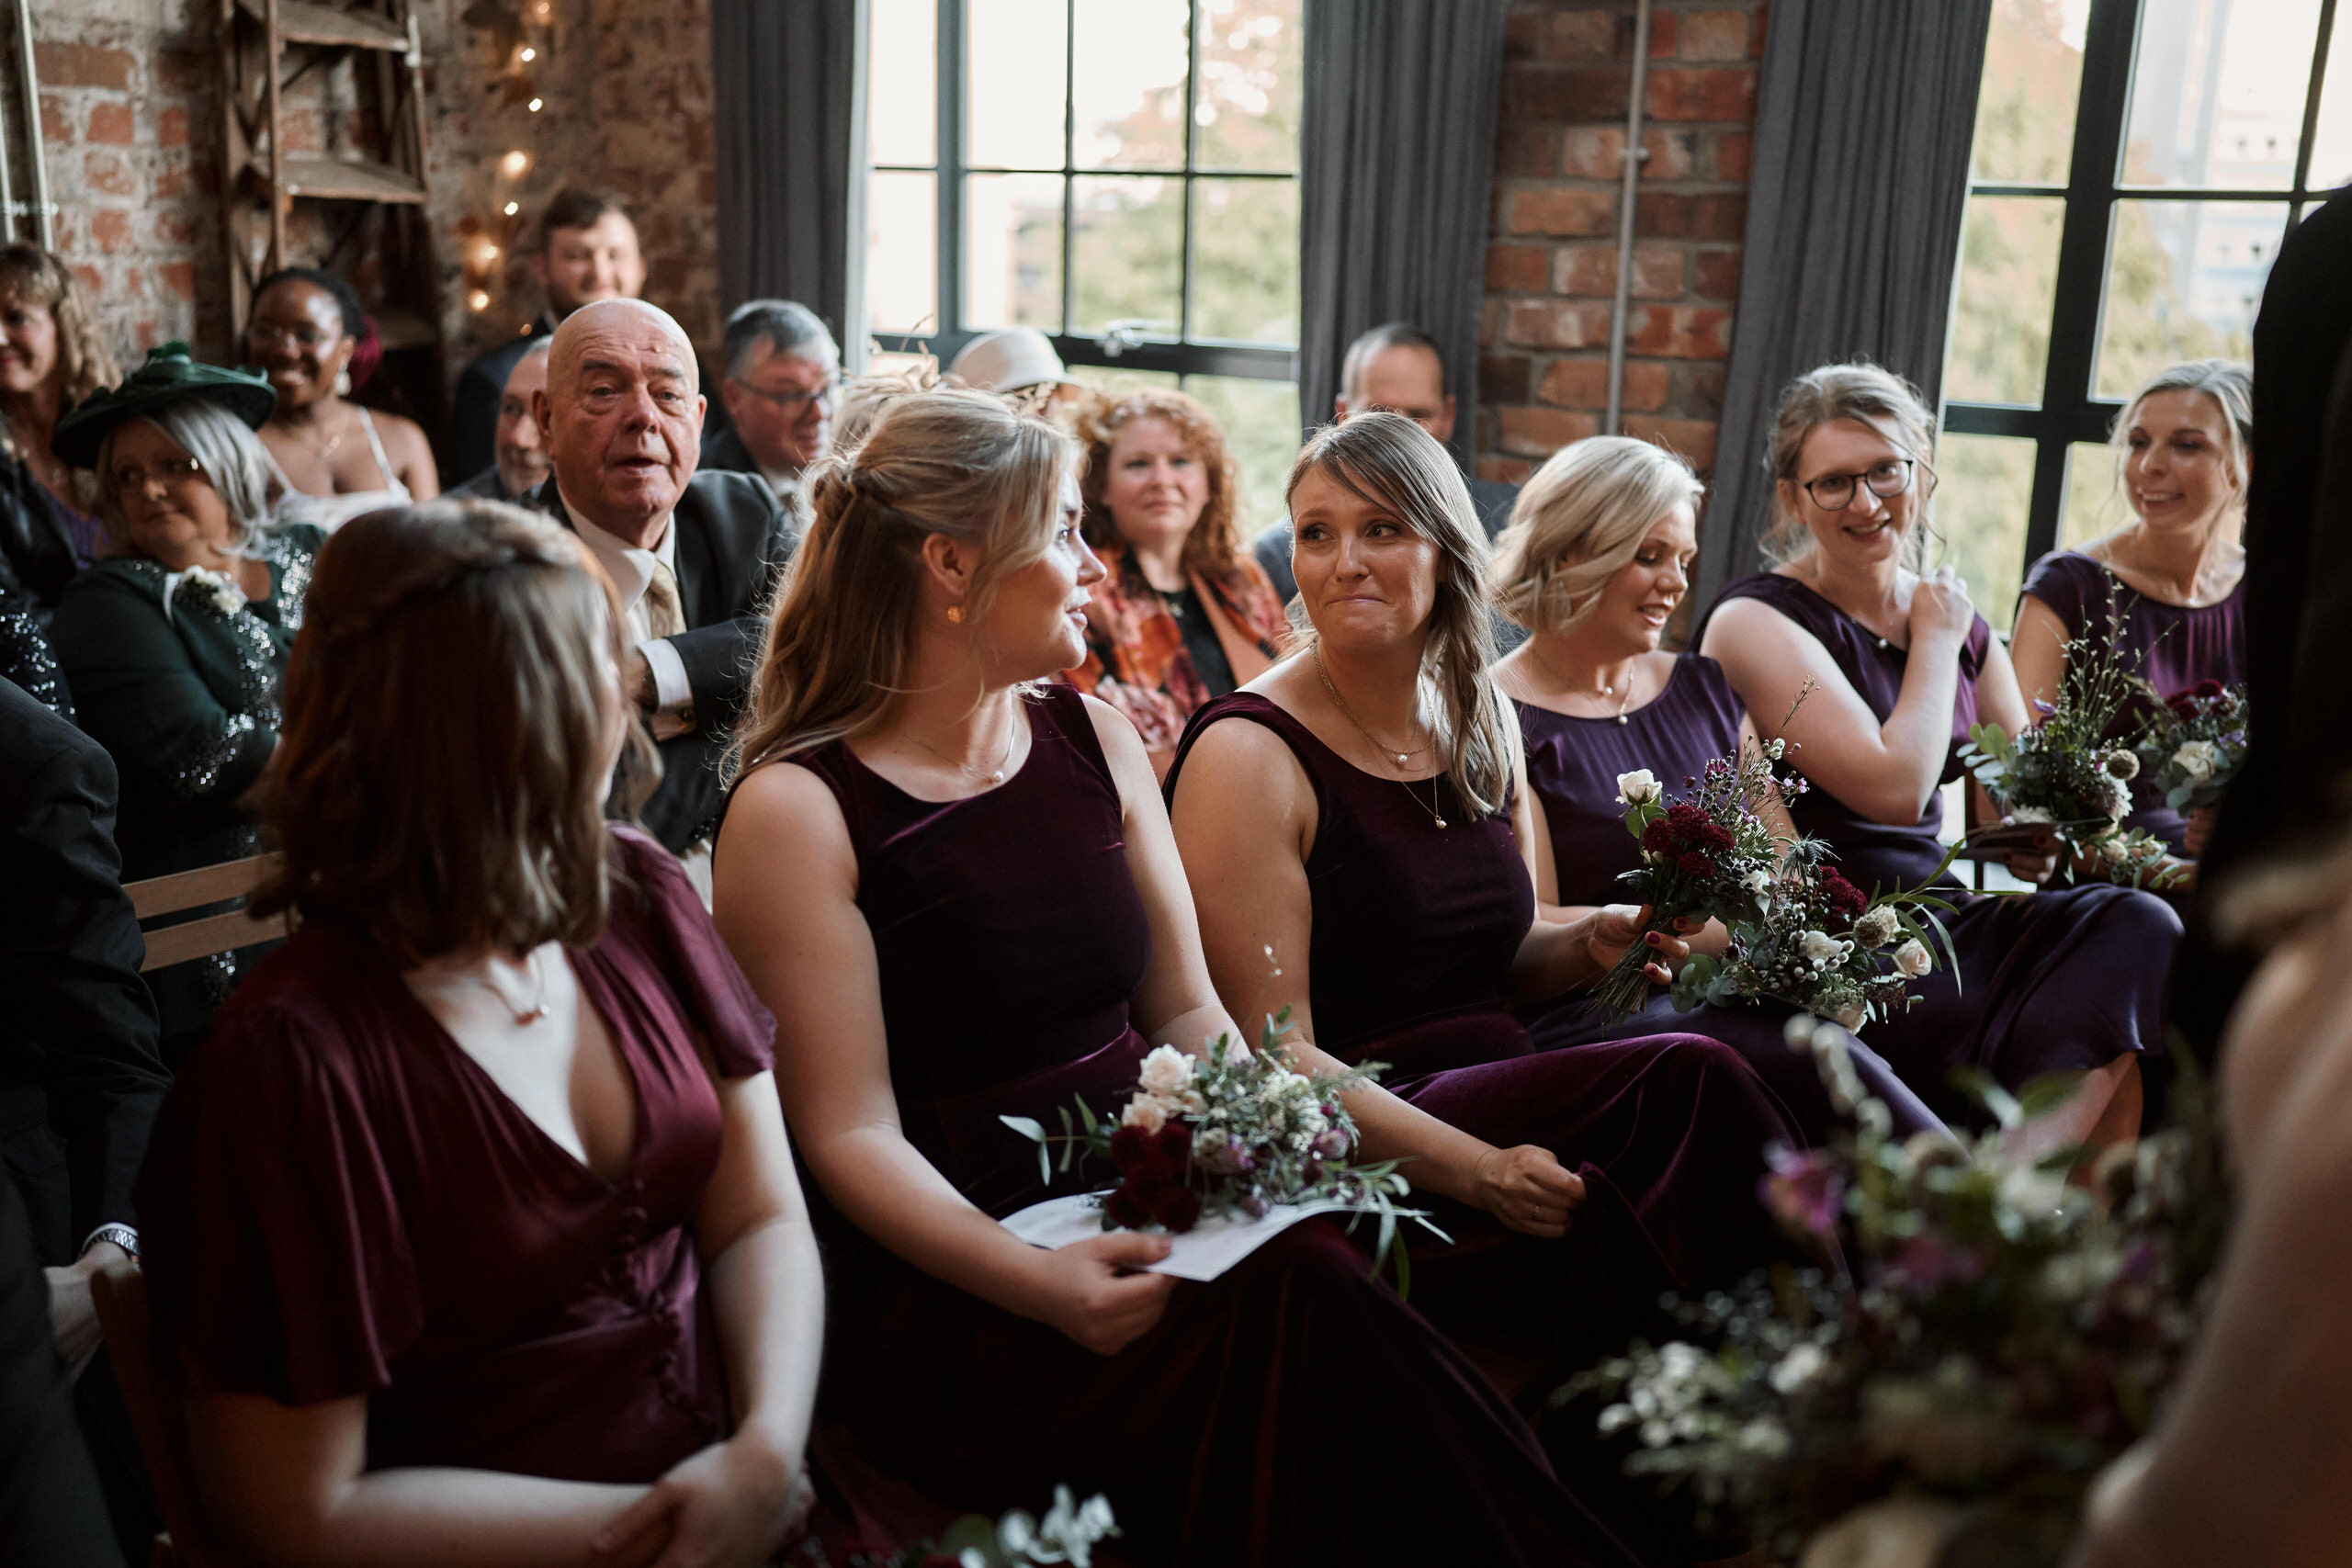 A bride and her friends are seated at a wedding ceremony.